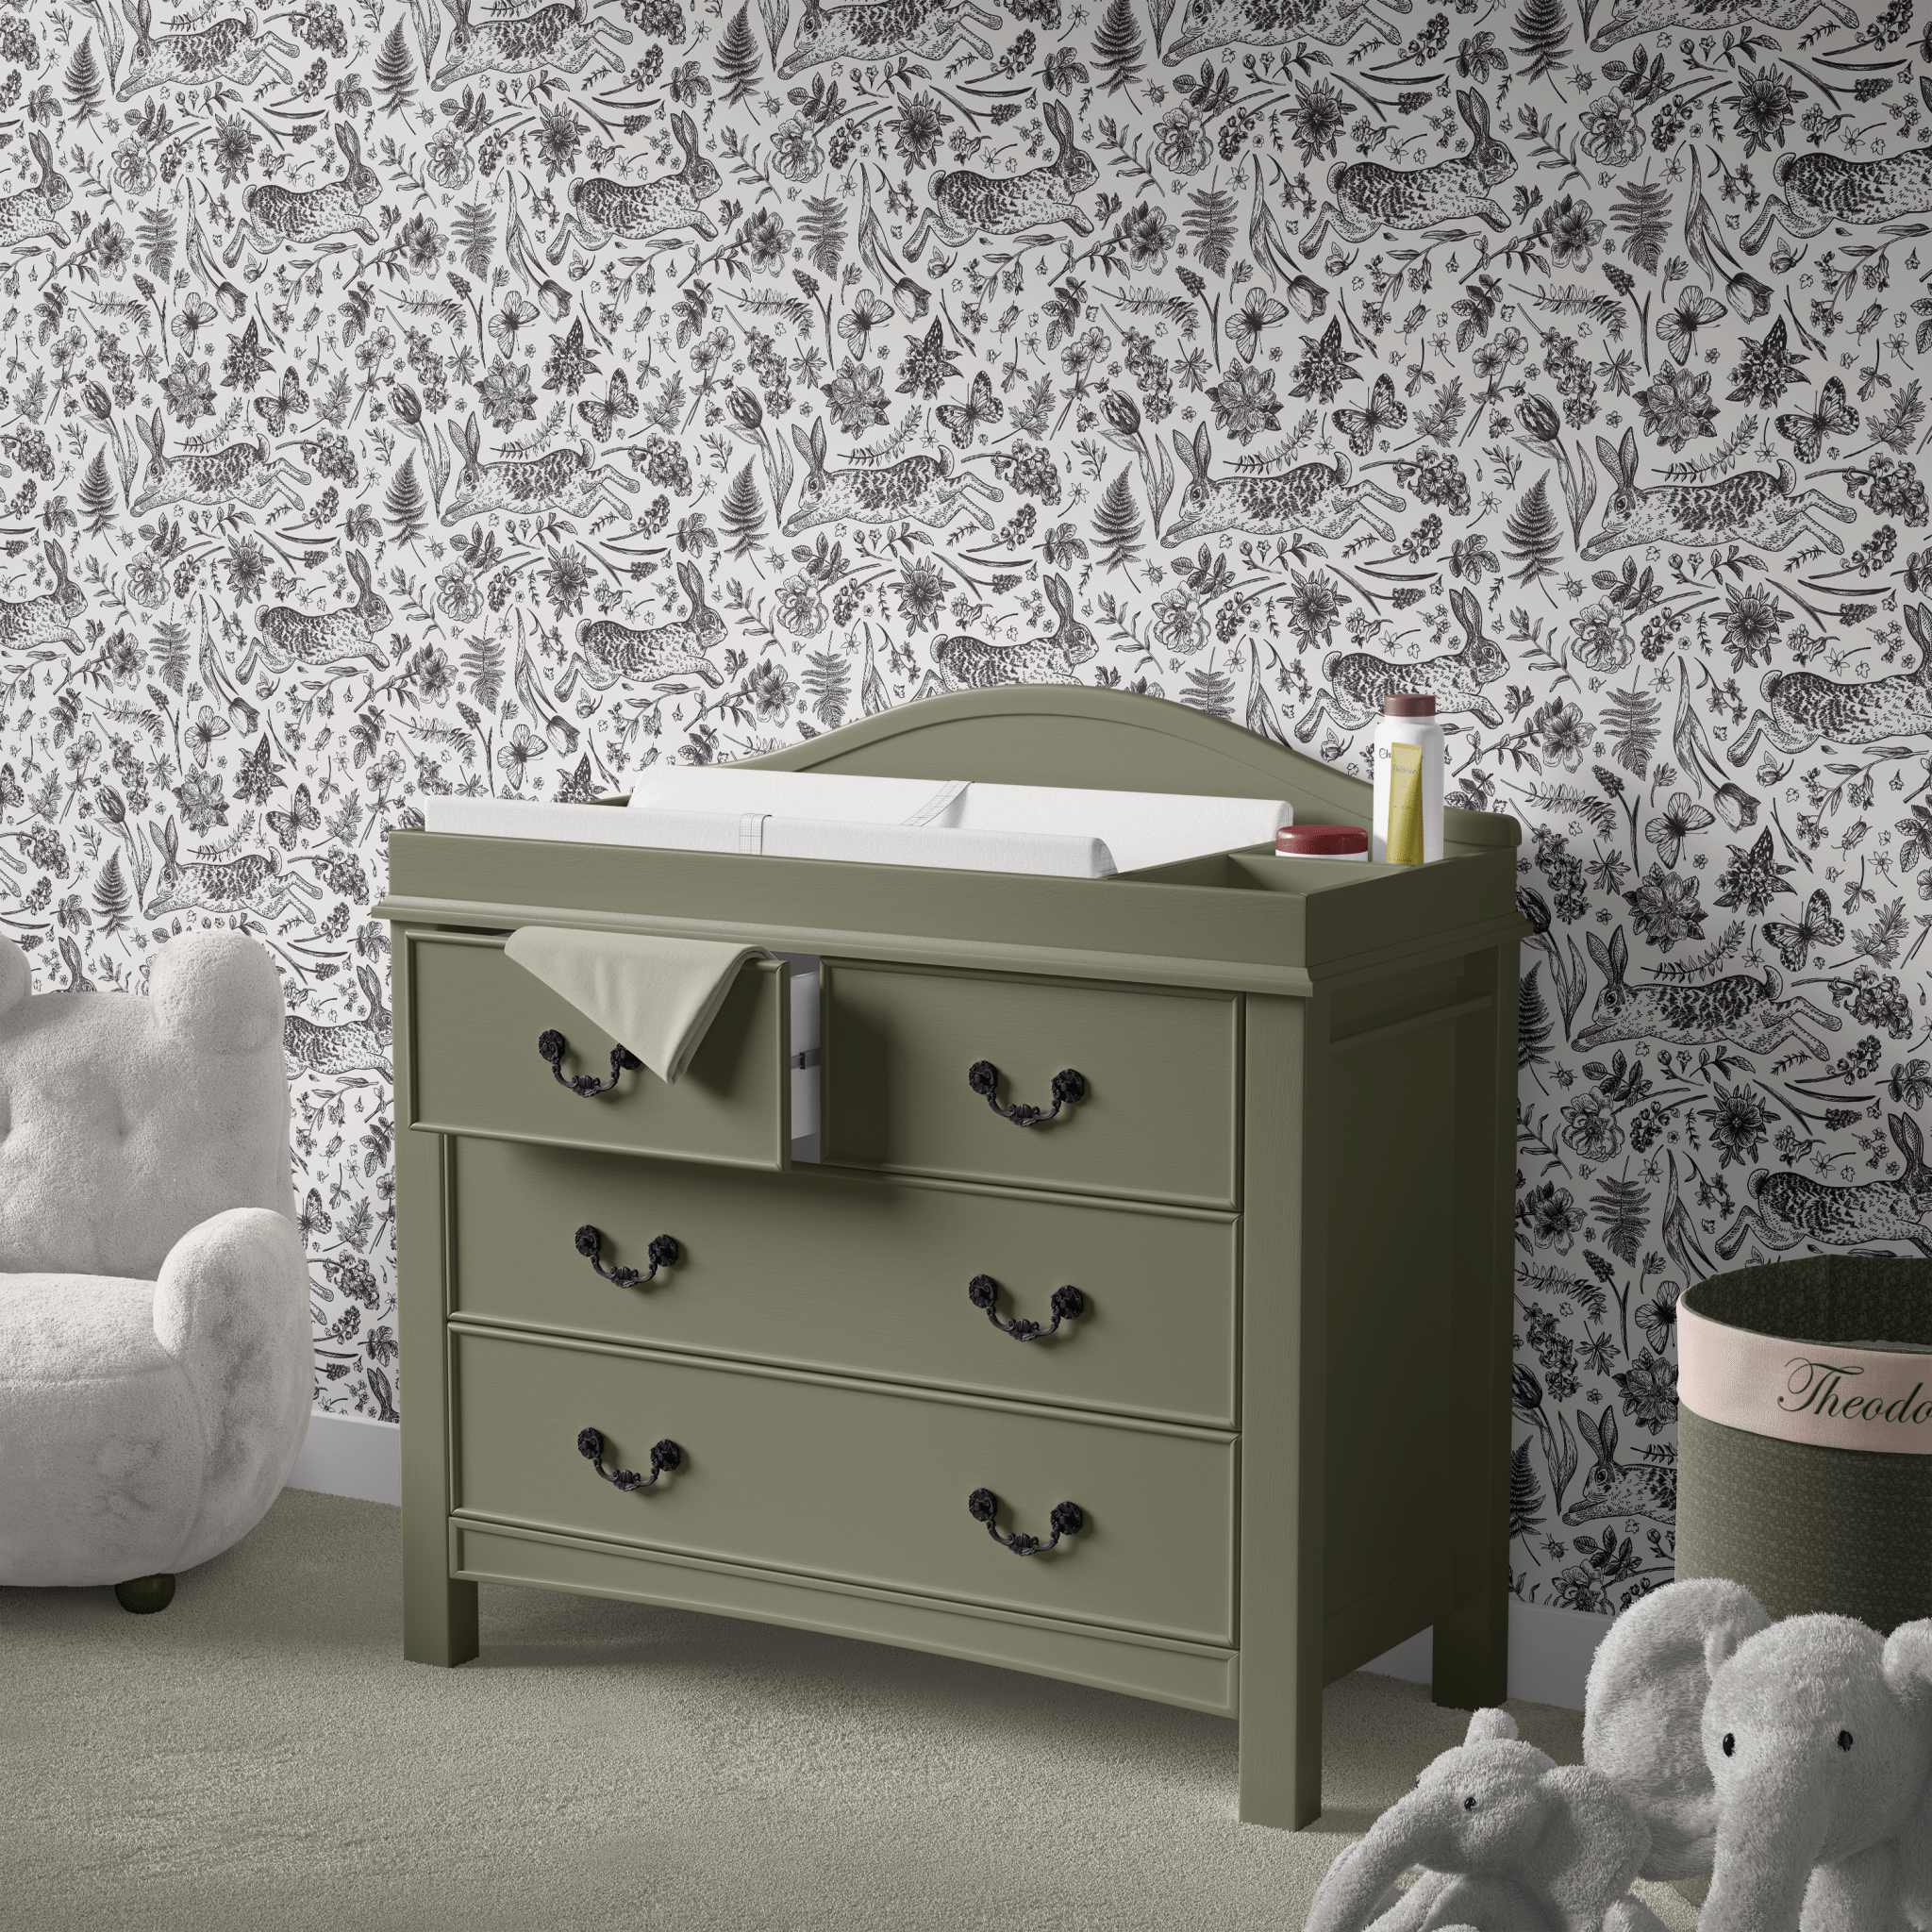 Chic and timeless monochrome peel and stick wallpaper featuring a whimsical pattern of bunnies, flowers, and butterflies, creating an elegant and playful atmosphere in a baby's nursery with a classic green changing table